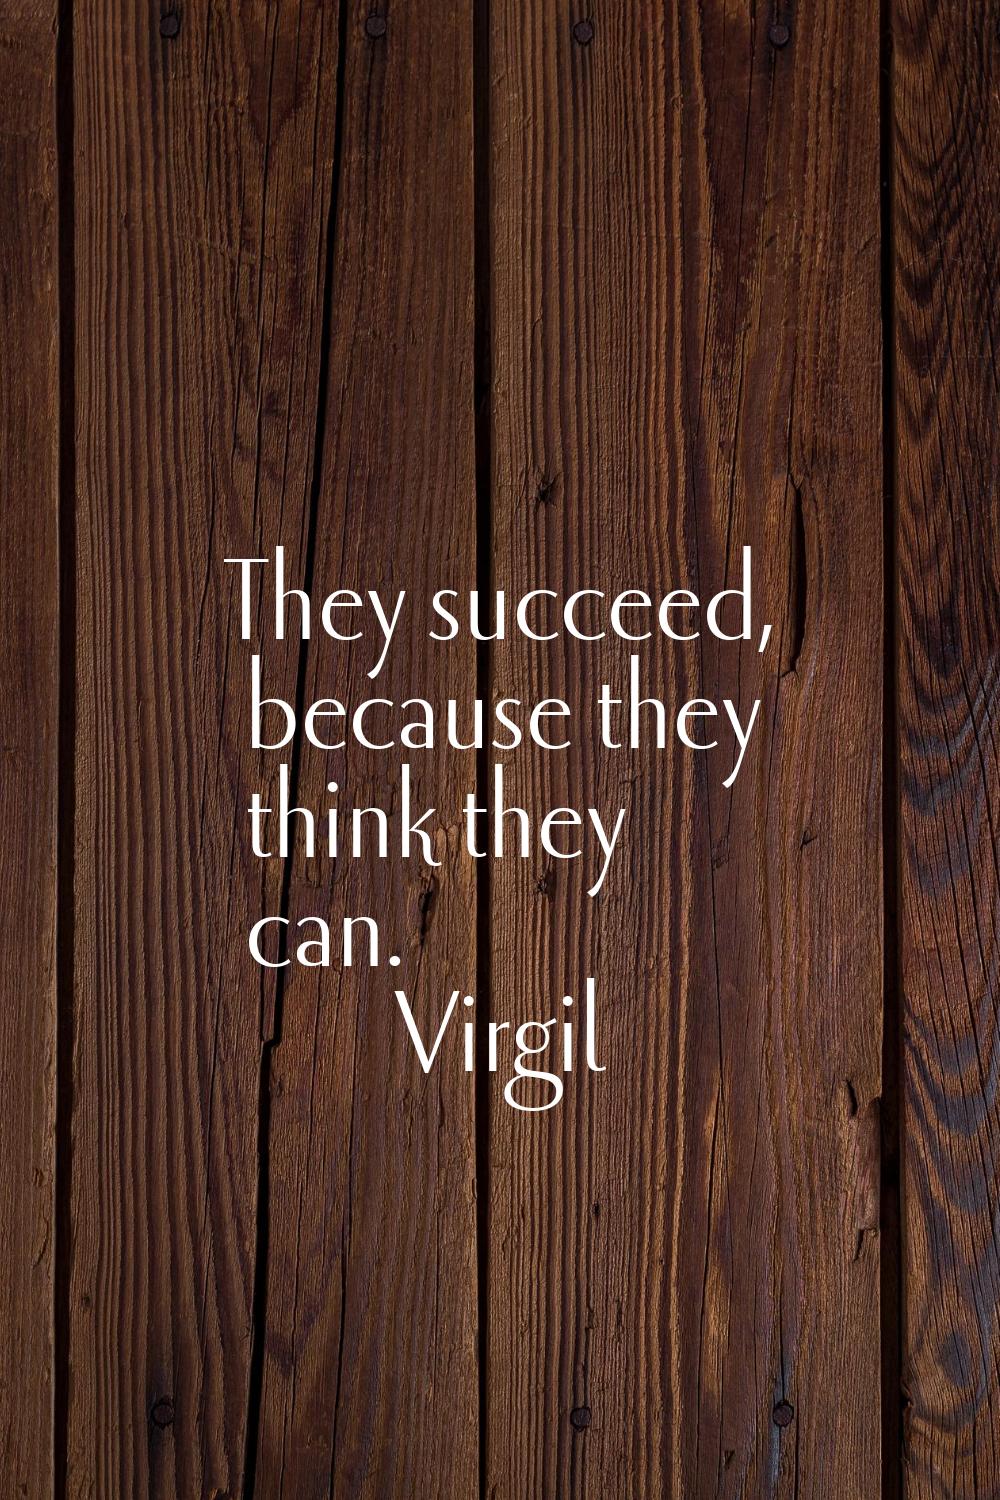 They succeed, because they think they can.